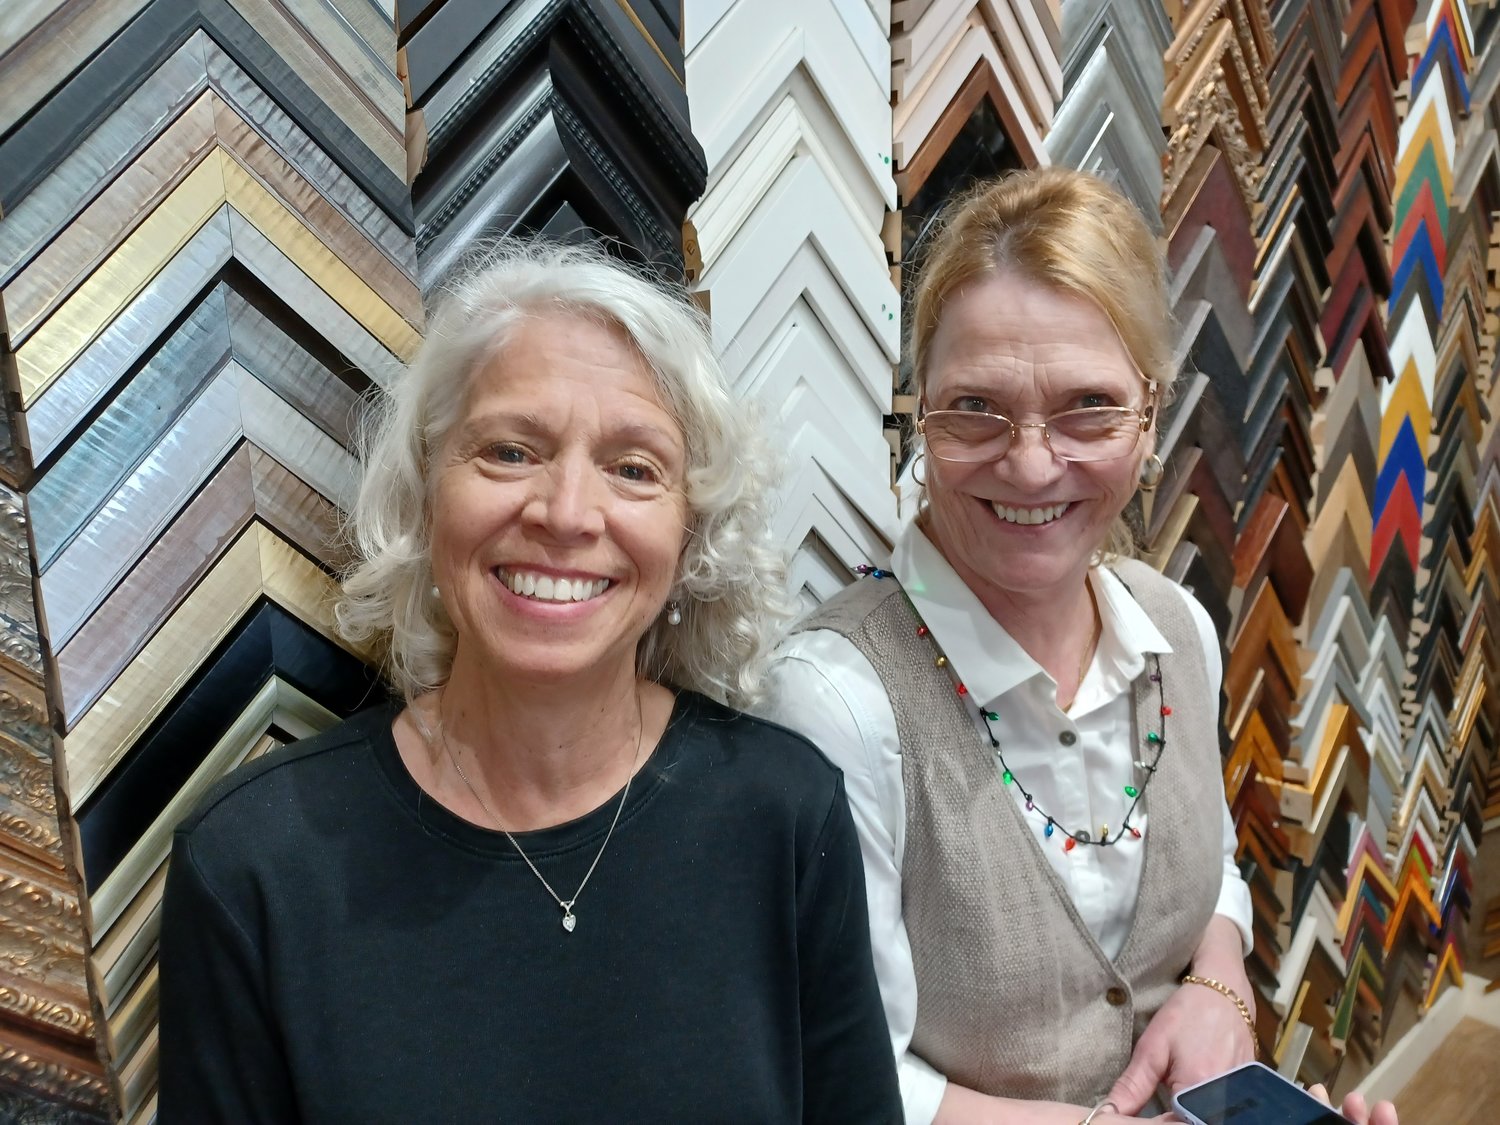 Lisa Cederberg, left, and Pamela Keegan welcomed the public to their business, Village Arts Framing and Gallery, during a holiday open house on Saturday, Dec. 11.